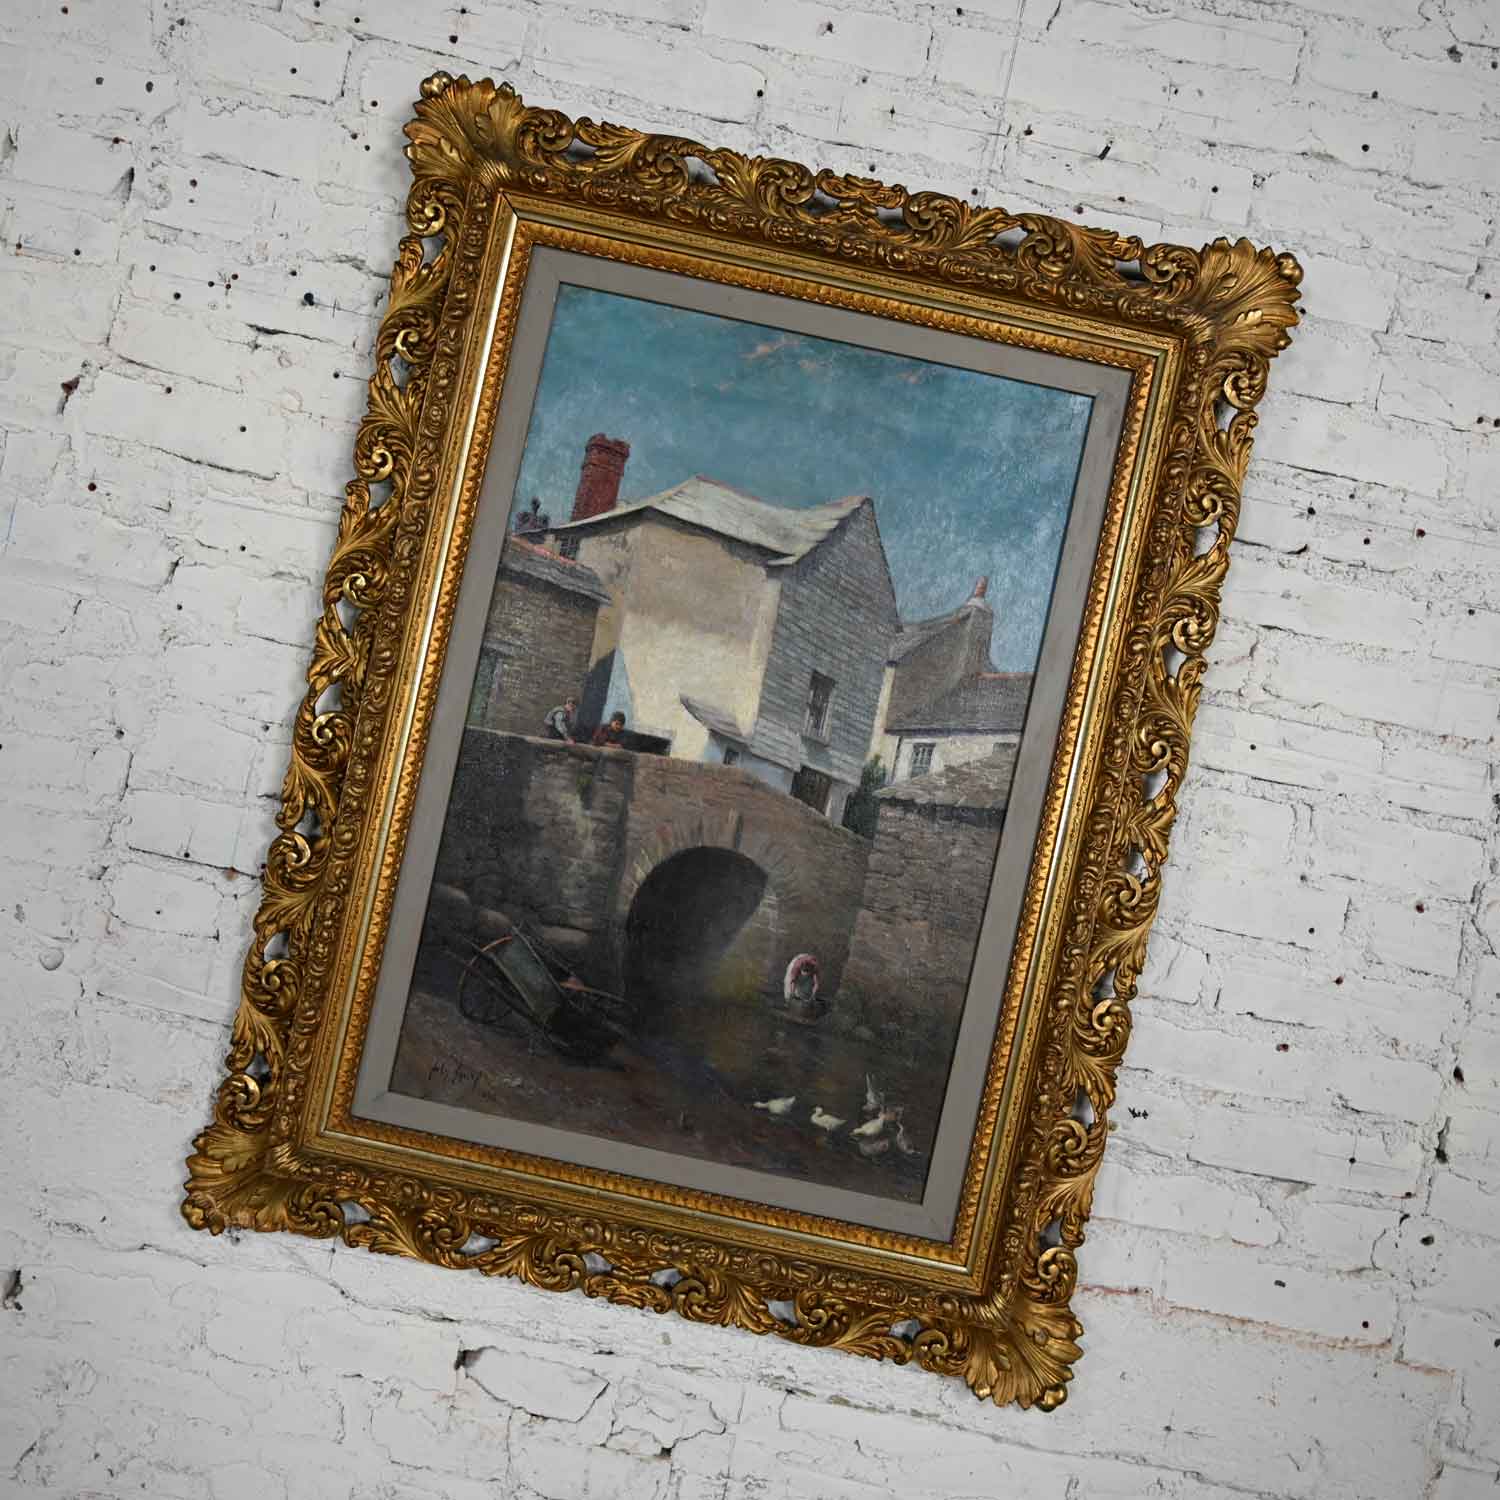 Antique Realism Landscape Oil Painting by Hely Smith Titled Polperro Original Gilded Baroque Frame Dated 1896